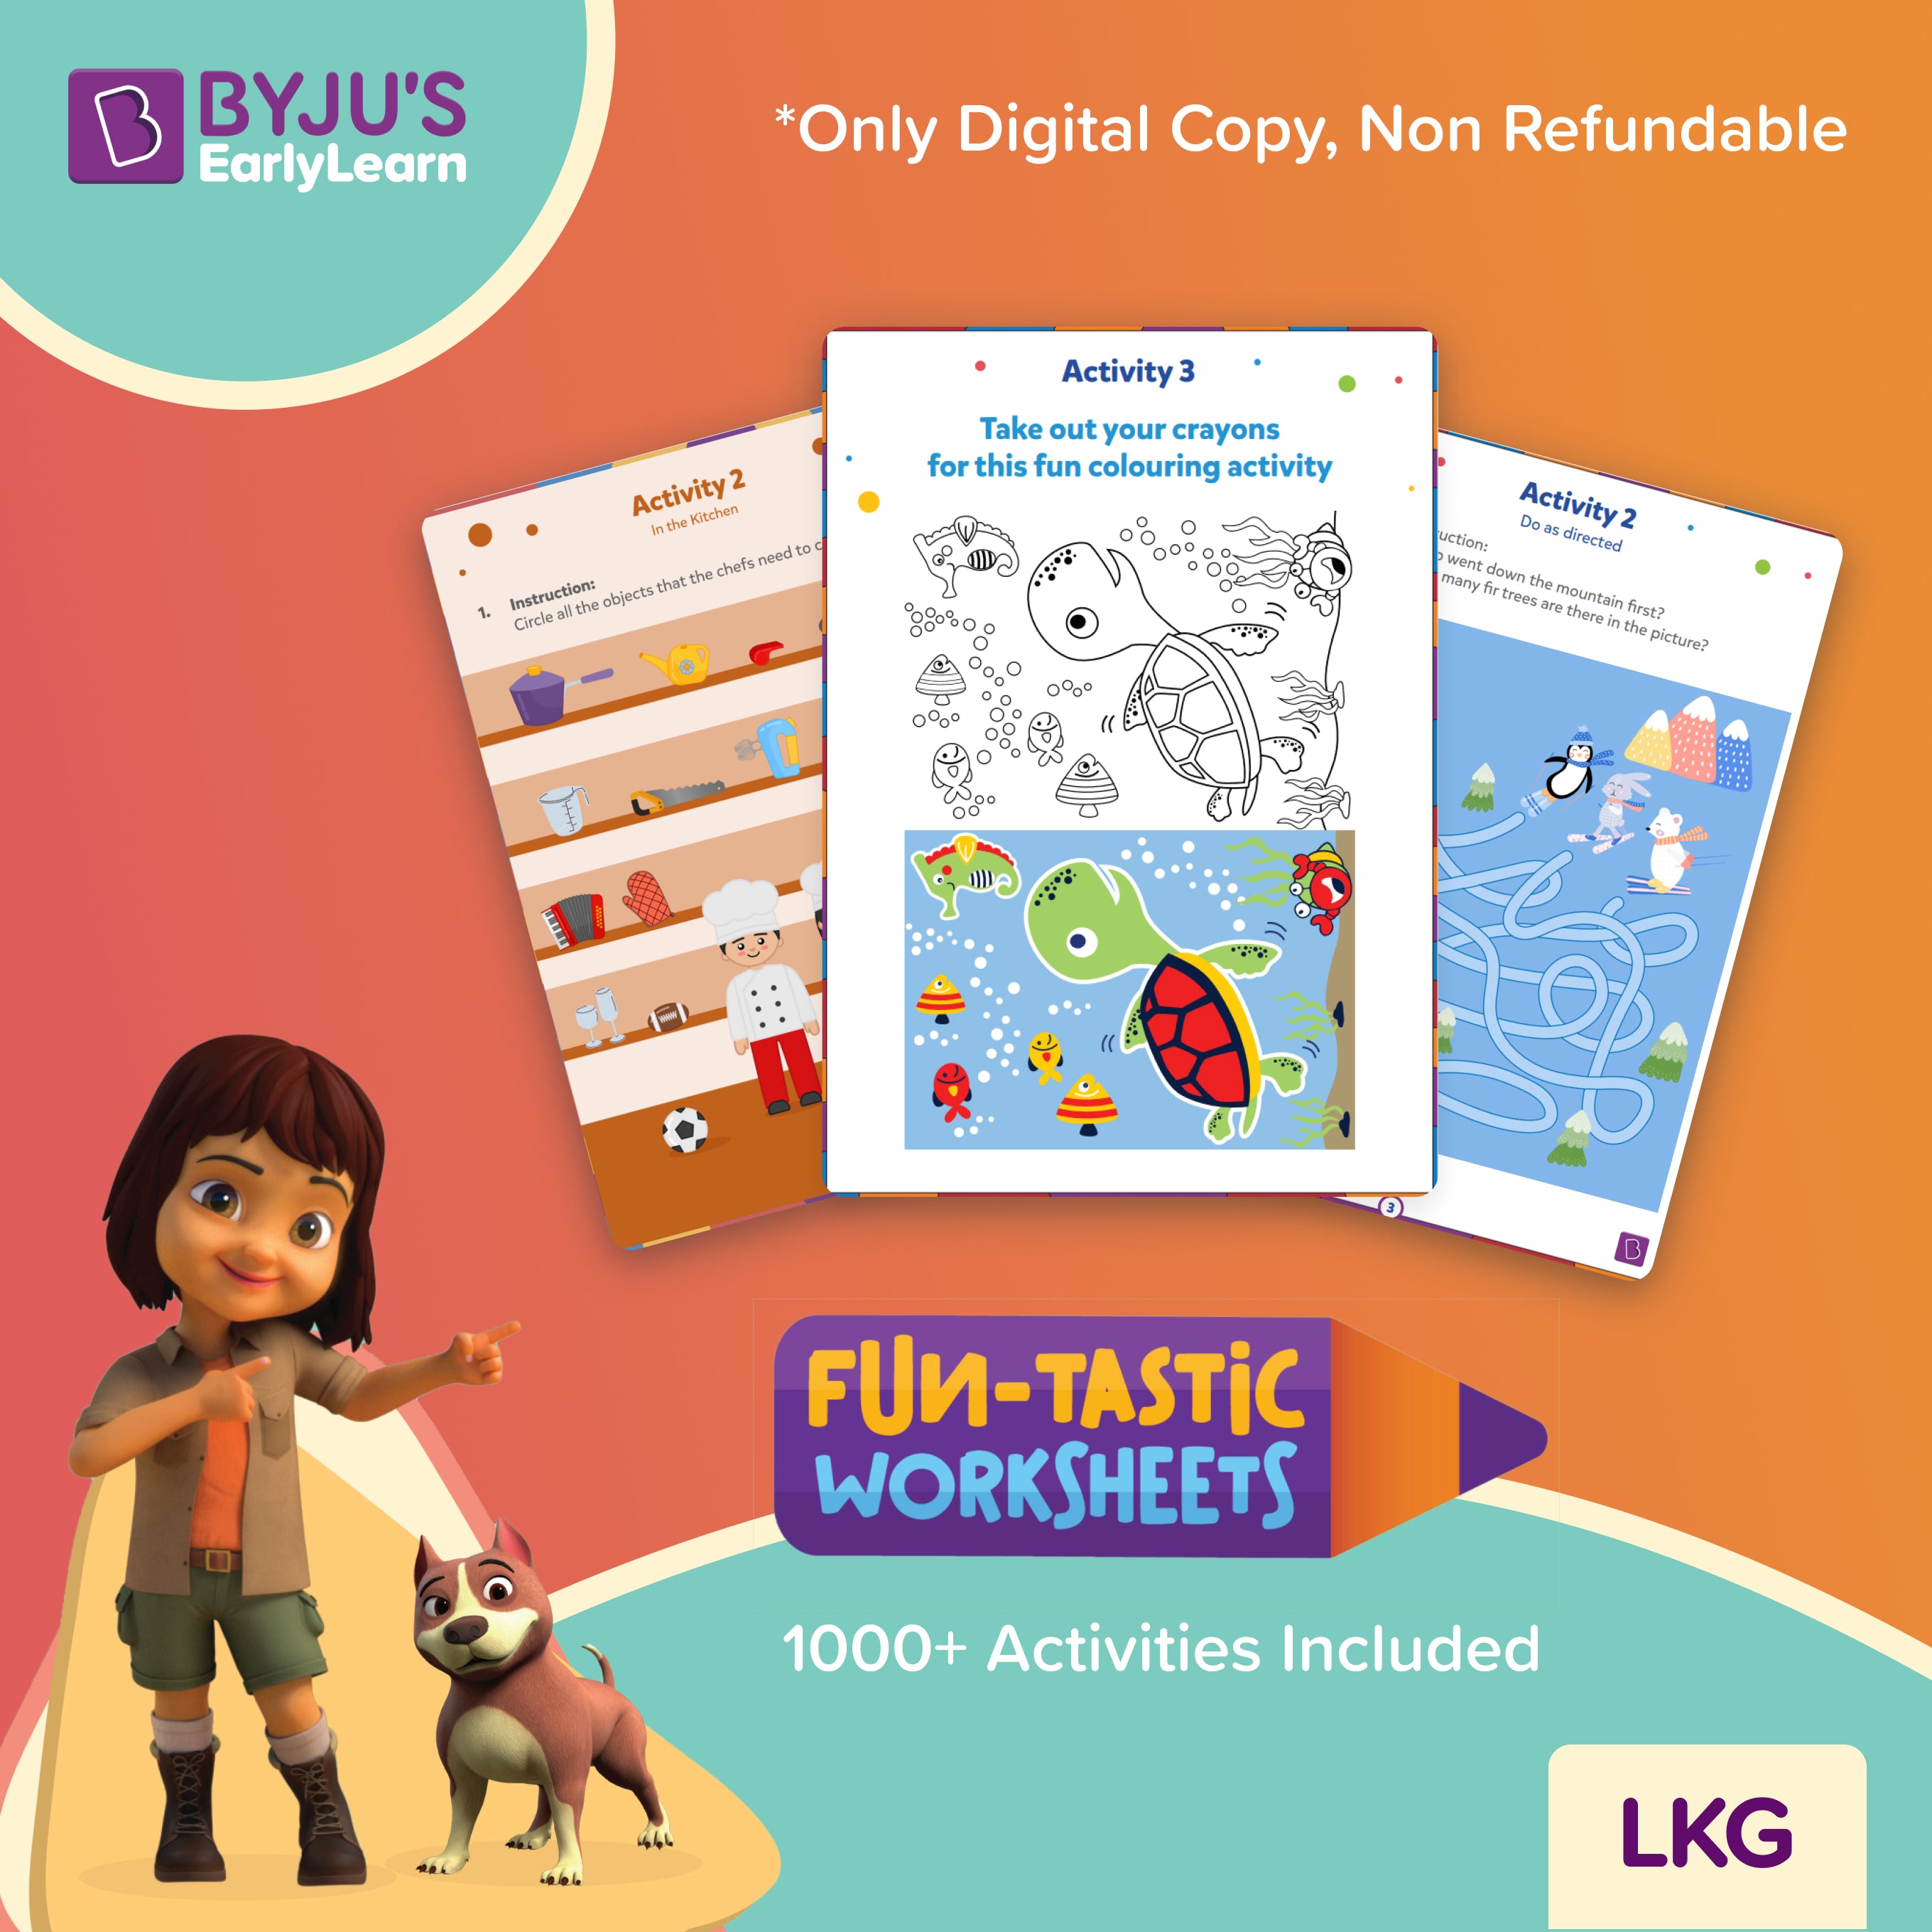 BYJU'S Early Learn - Fun Worksheets & Activities | LKG